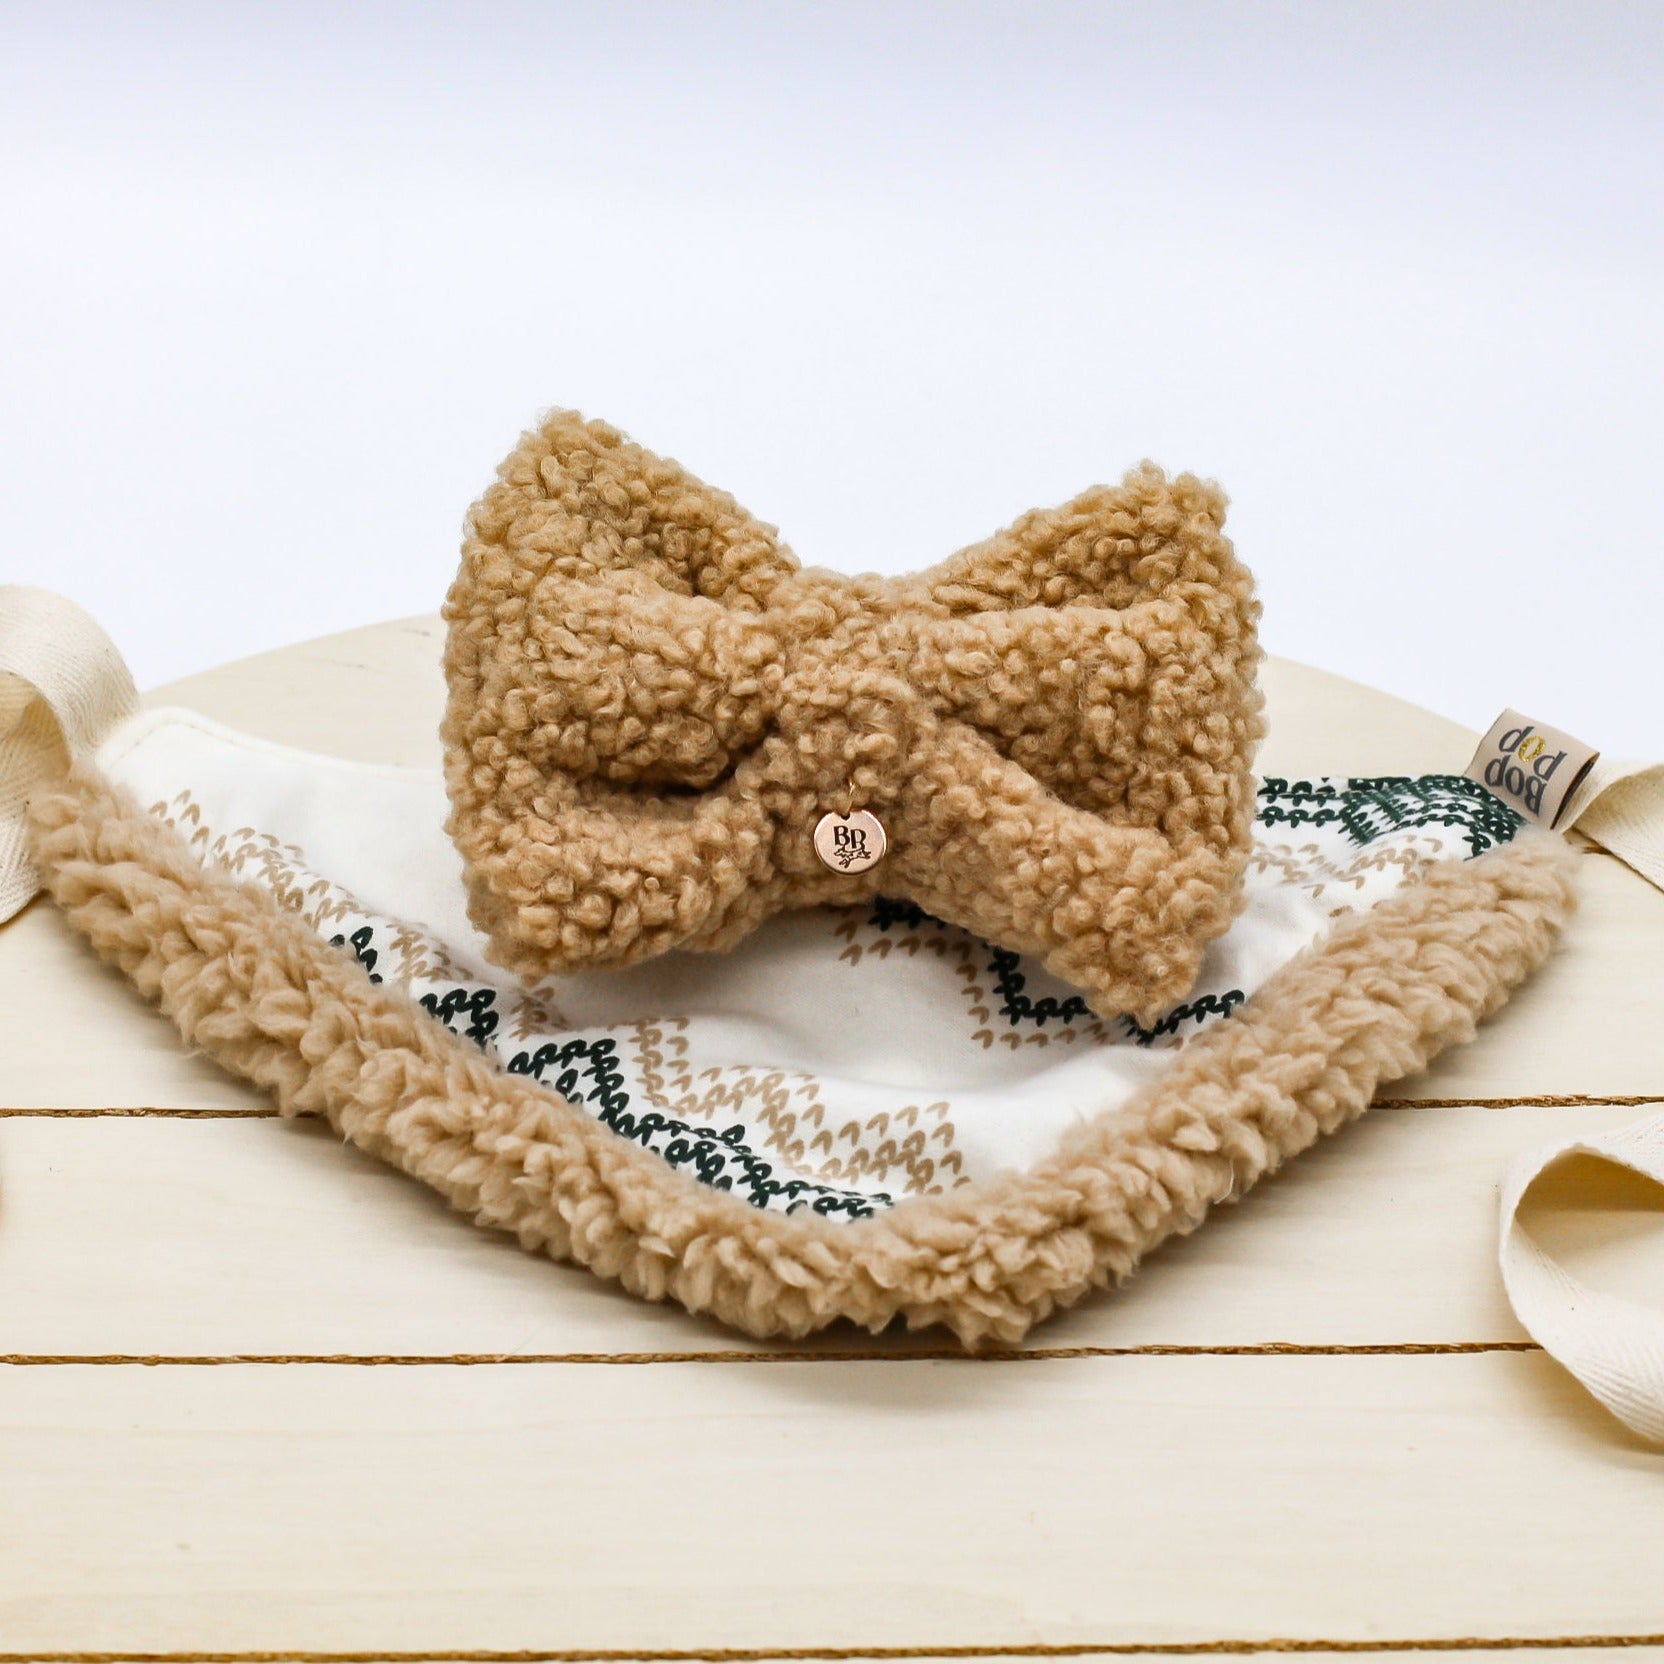 Teddy Sherpa fuzzy puffy Pet Dog Cat bow tie pet accessories caramel mocha brown color soft cozy bows sherpa bandana bop pop pets solid brass hardware snap button easy-to-use comfort